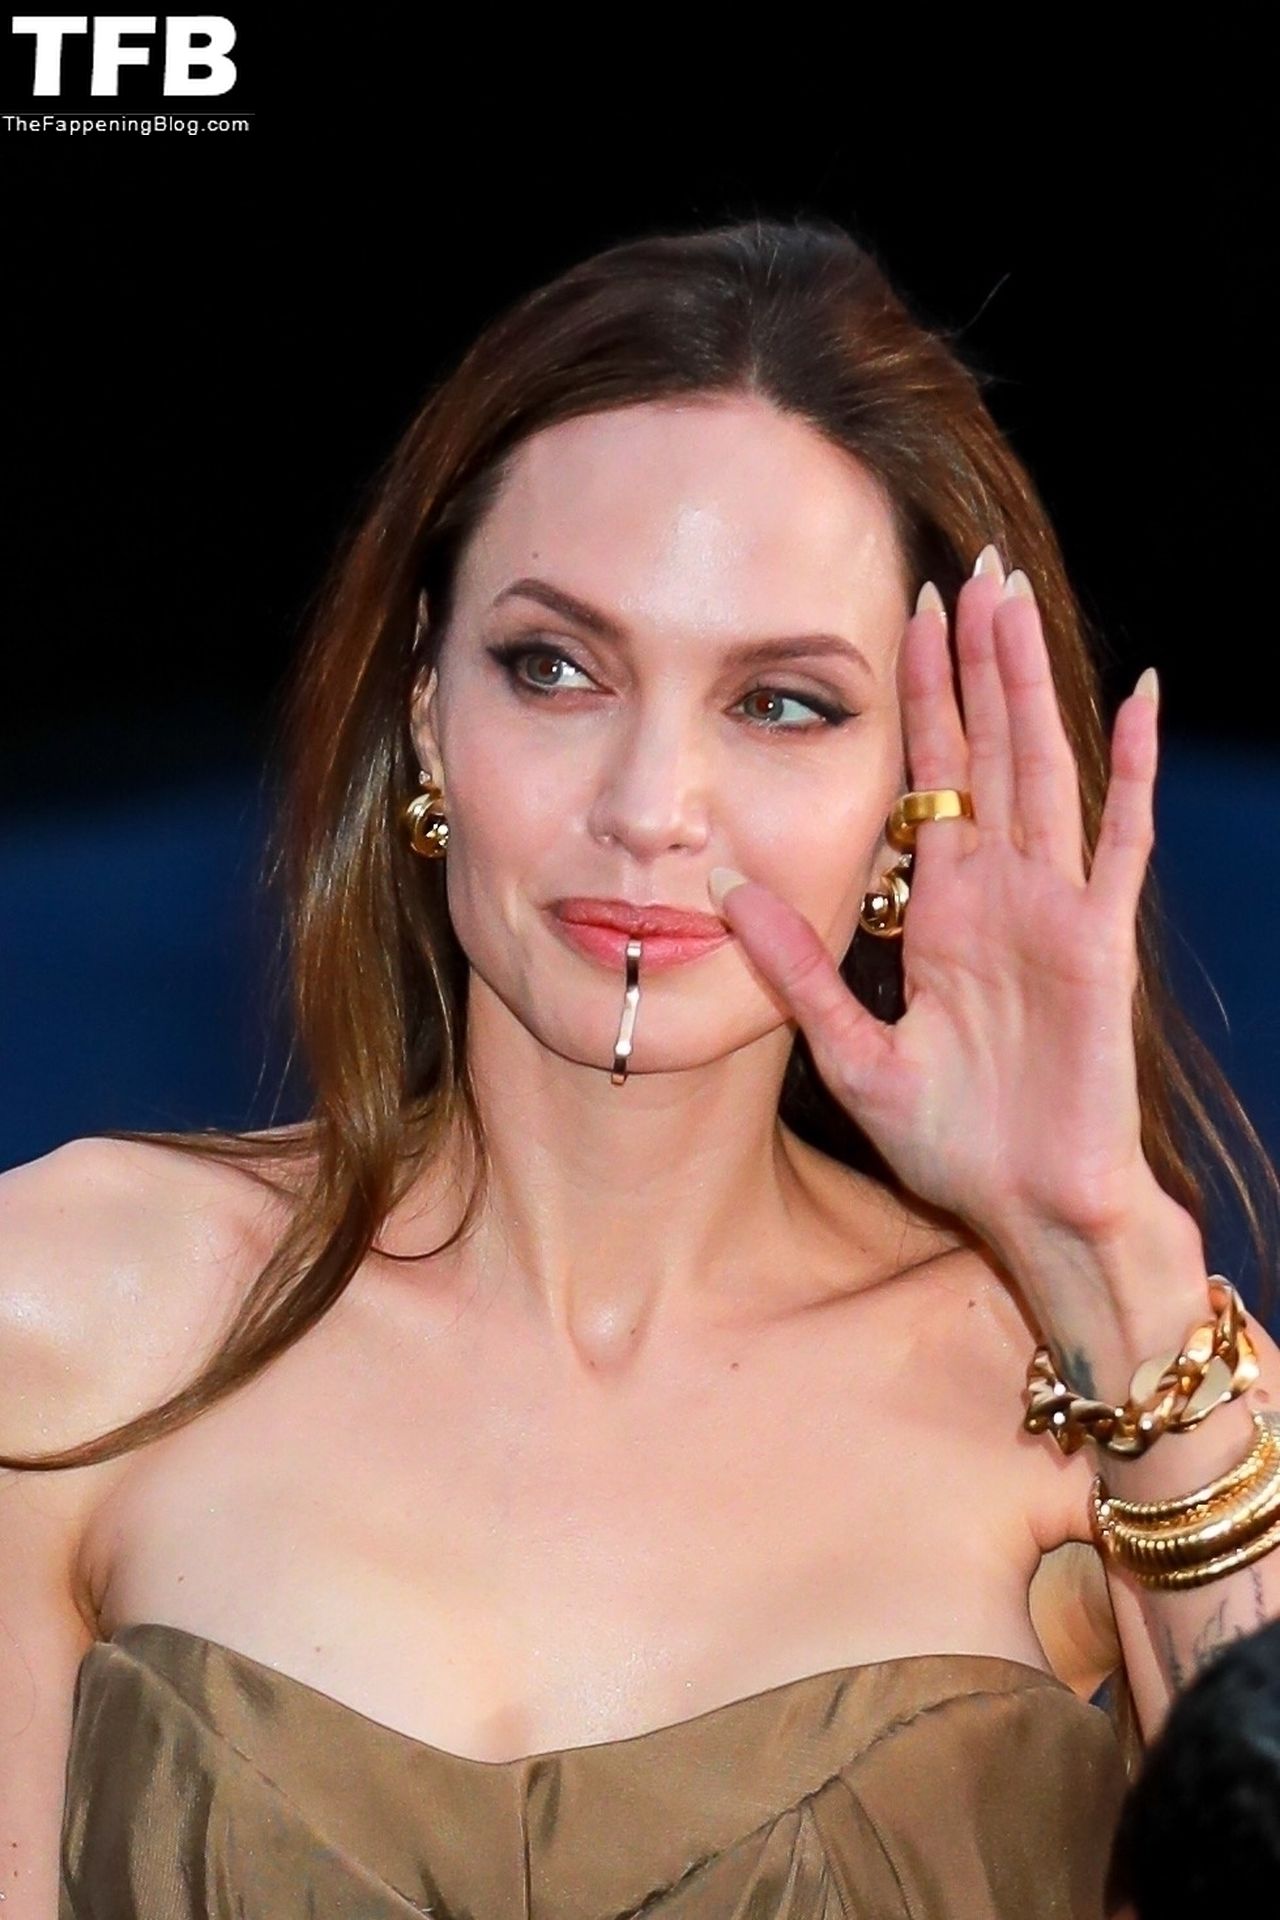 Angelina-Jolie-Sexy-The-Fappening-Blog-82.jpg